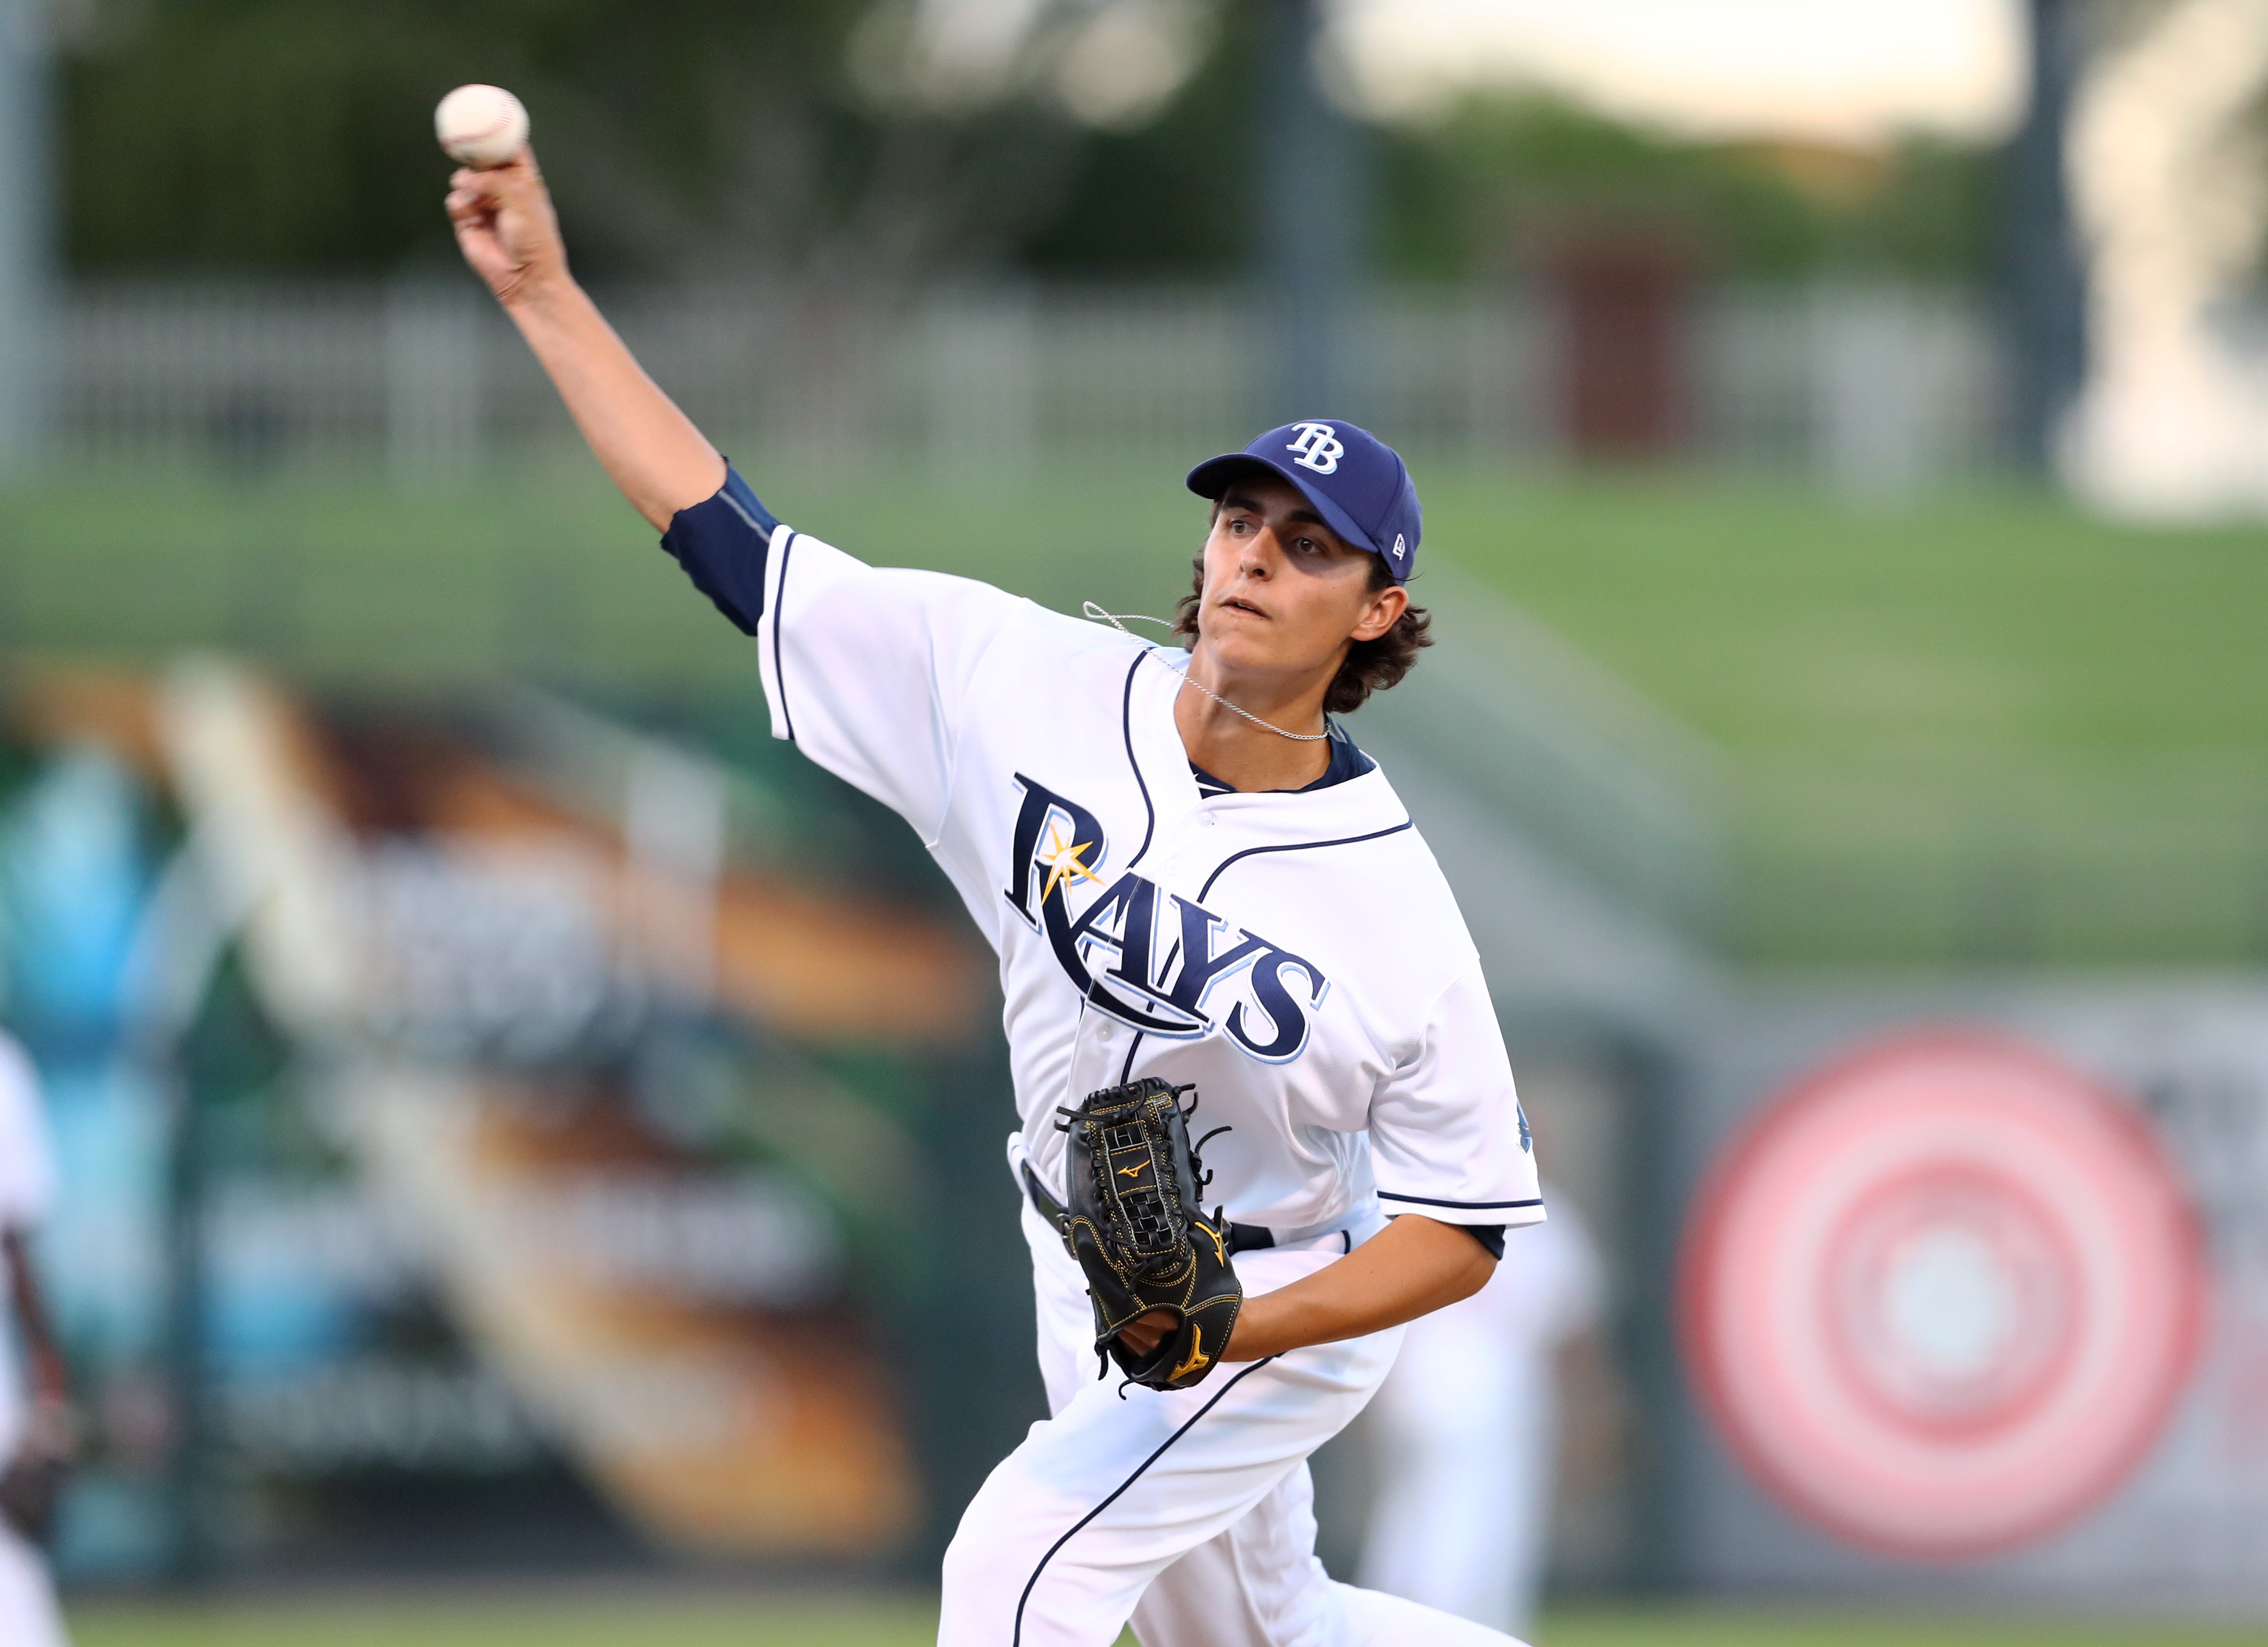 Willy Adames leader for Rays prospects